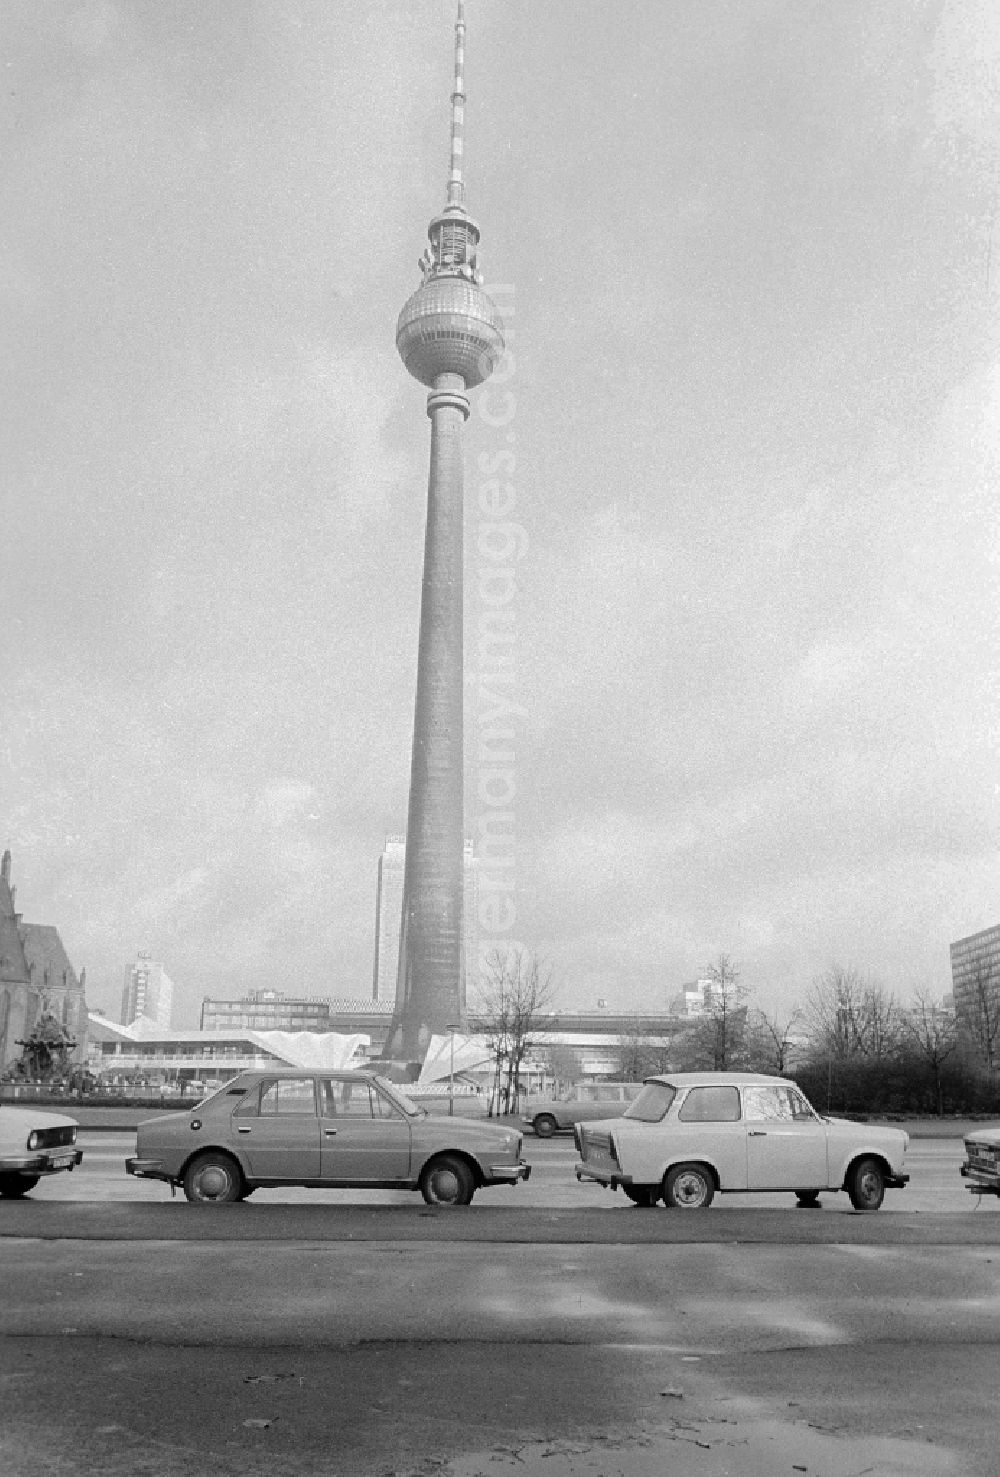 GDR photo archive: Berlin - The Berlin television tower of the Spandauer street in Berlin, the former capital of the GDR, German democratic republic